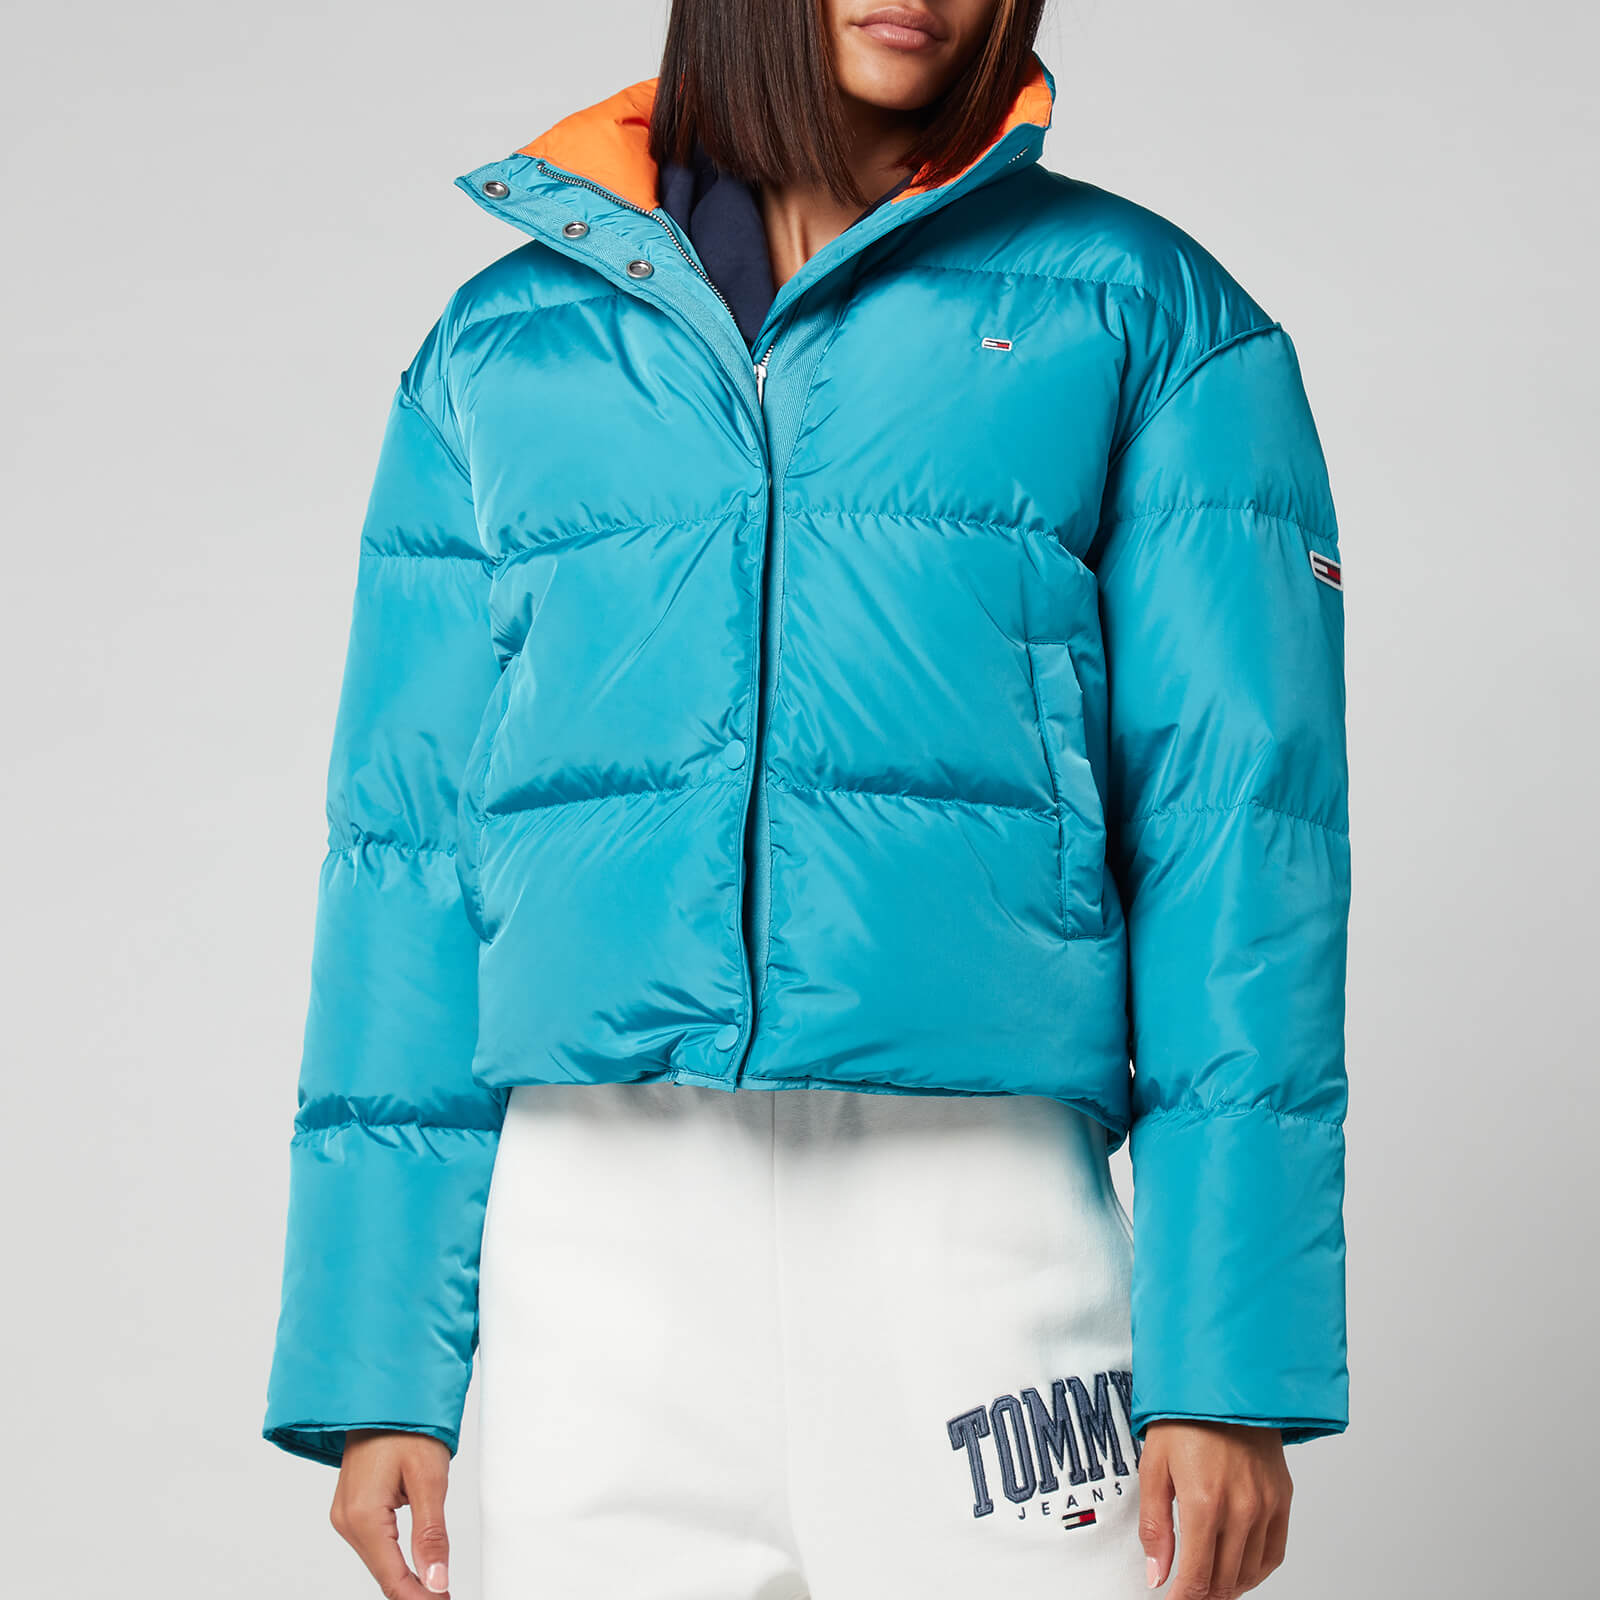 Tommy Jeans Women's Colour Pop Puffer Jacket - Tidewater product